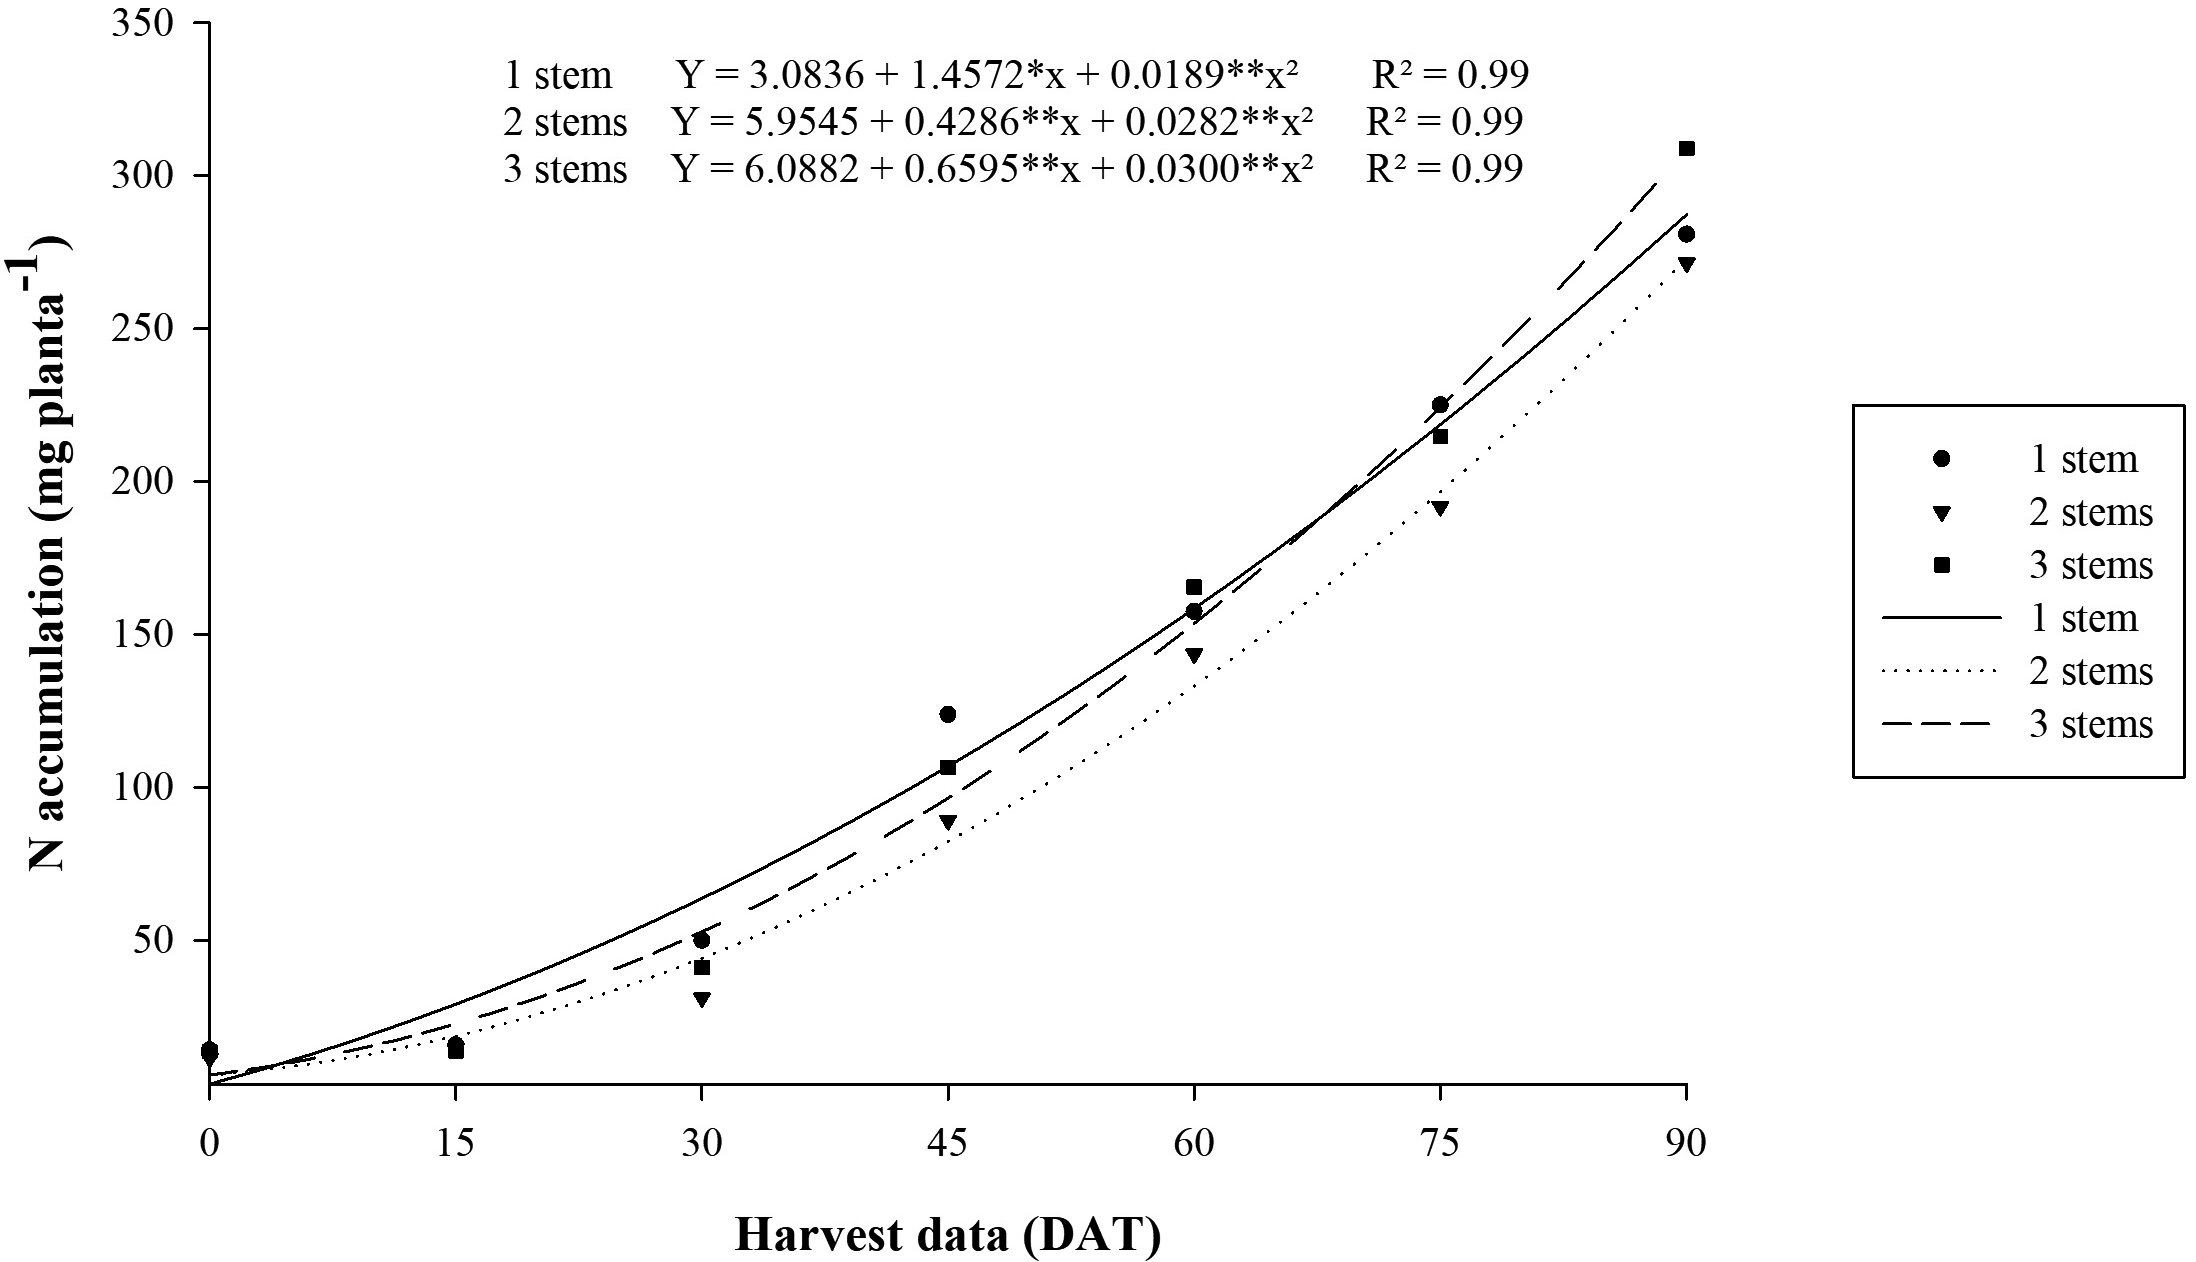  N accumulation through the lifecycle of goldenrod plants grown with one,
two and three stems. *, ** Significant at p
≤ 0.05 or 0.01, respectively.